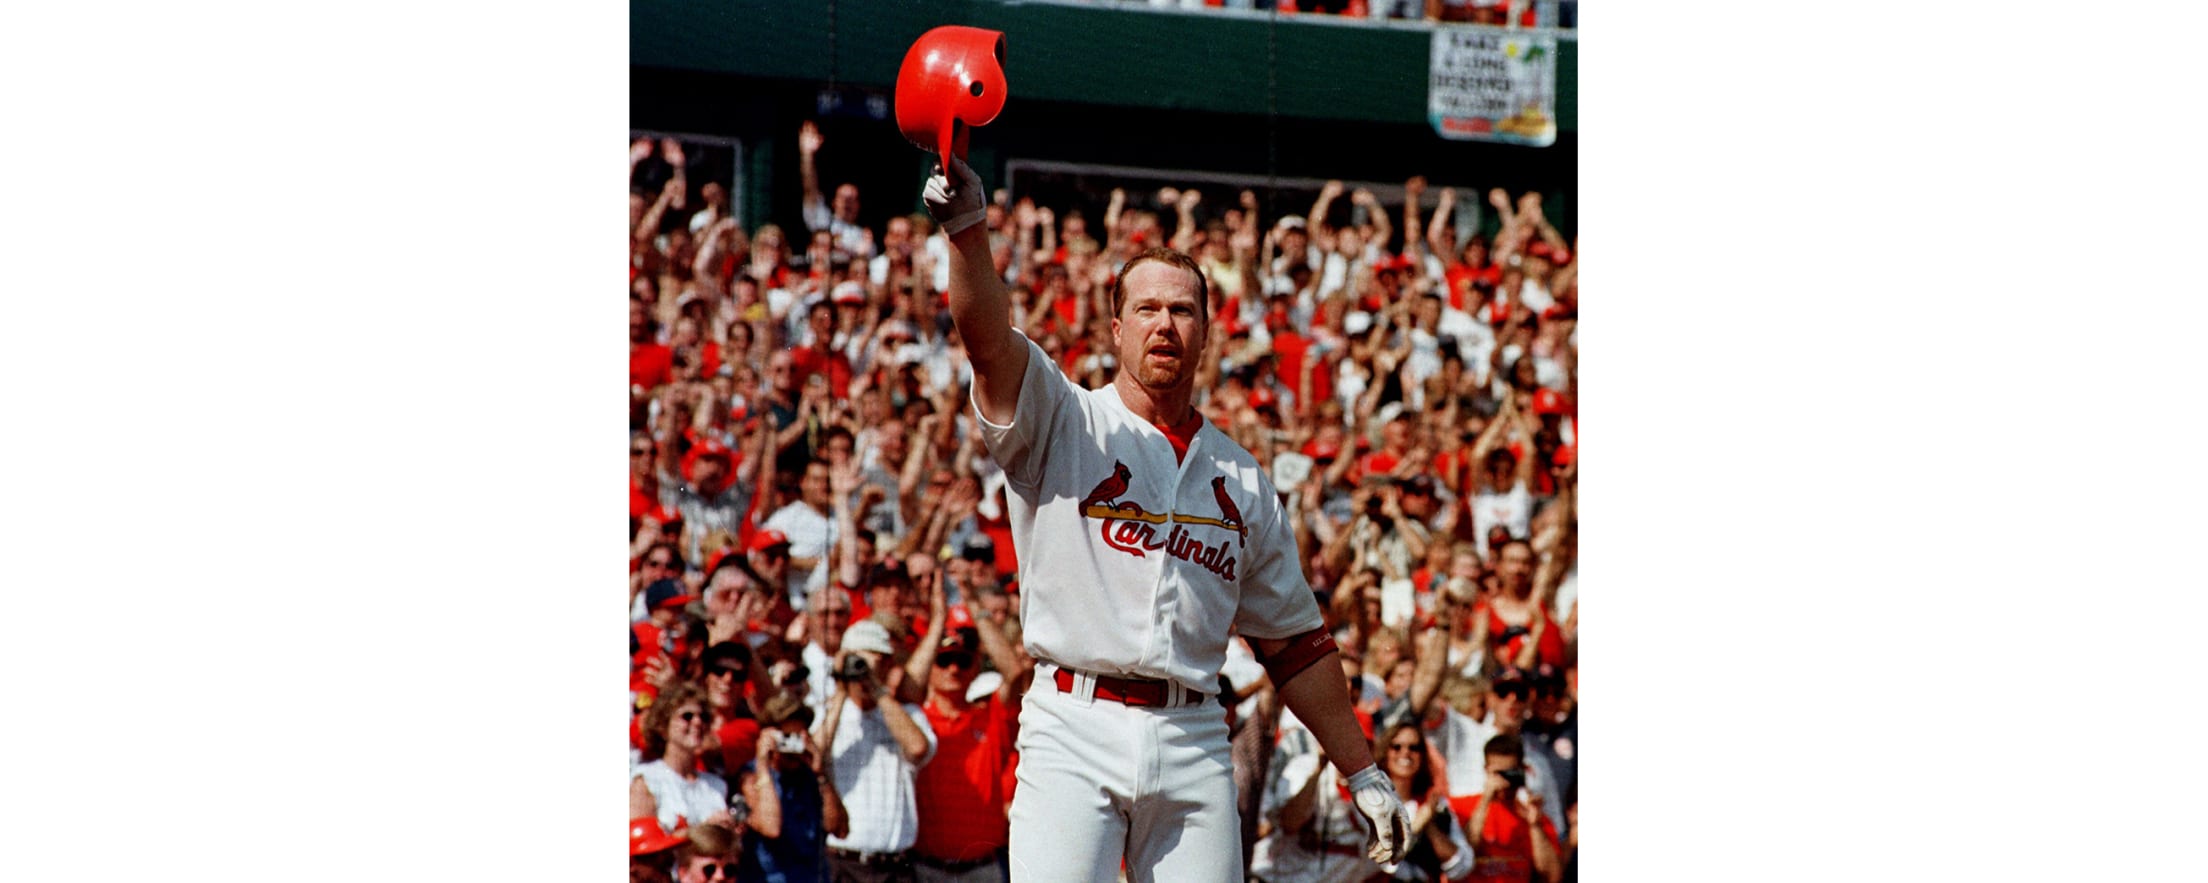 Sept. 27, 1998: McGwire hits 70 and is saluted as 'the new American sports  hero